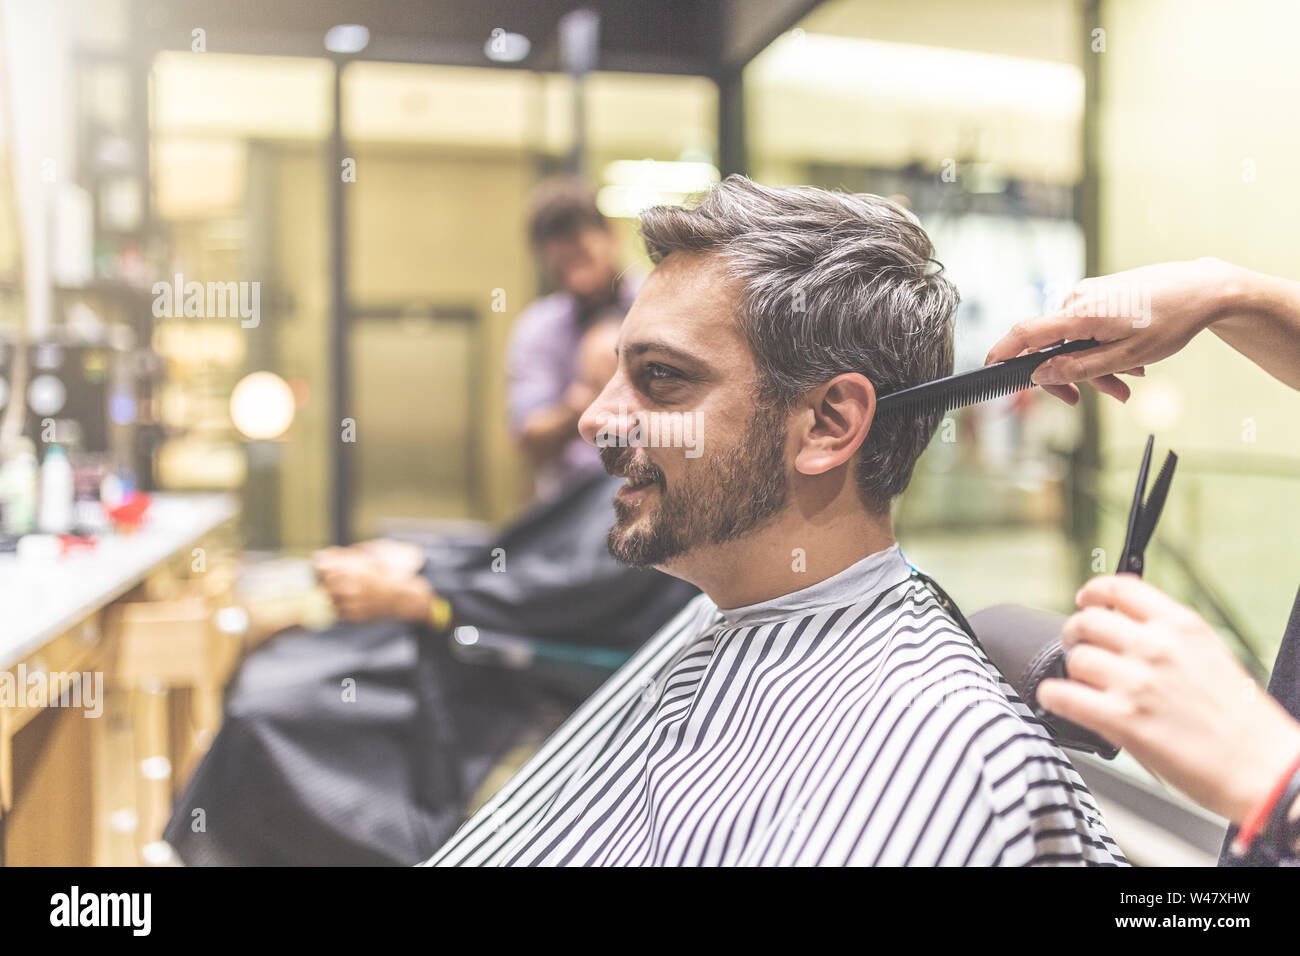 Professional barber styling hair of his client Stock Photo